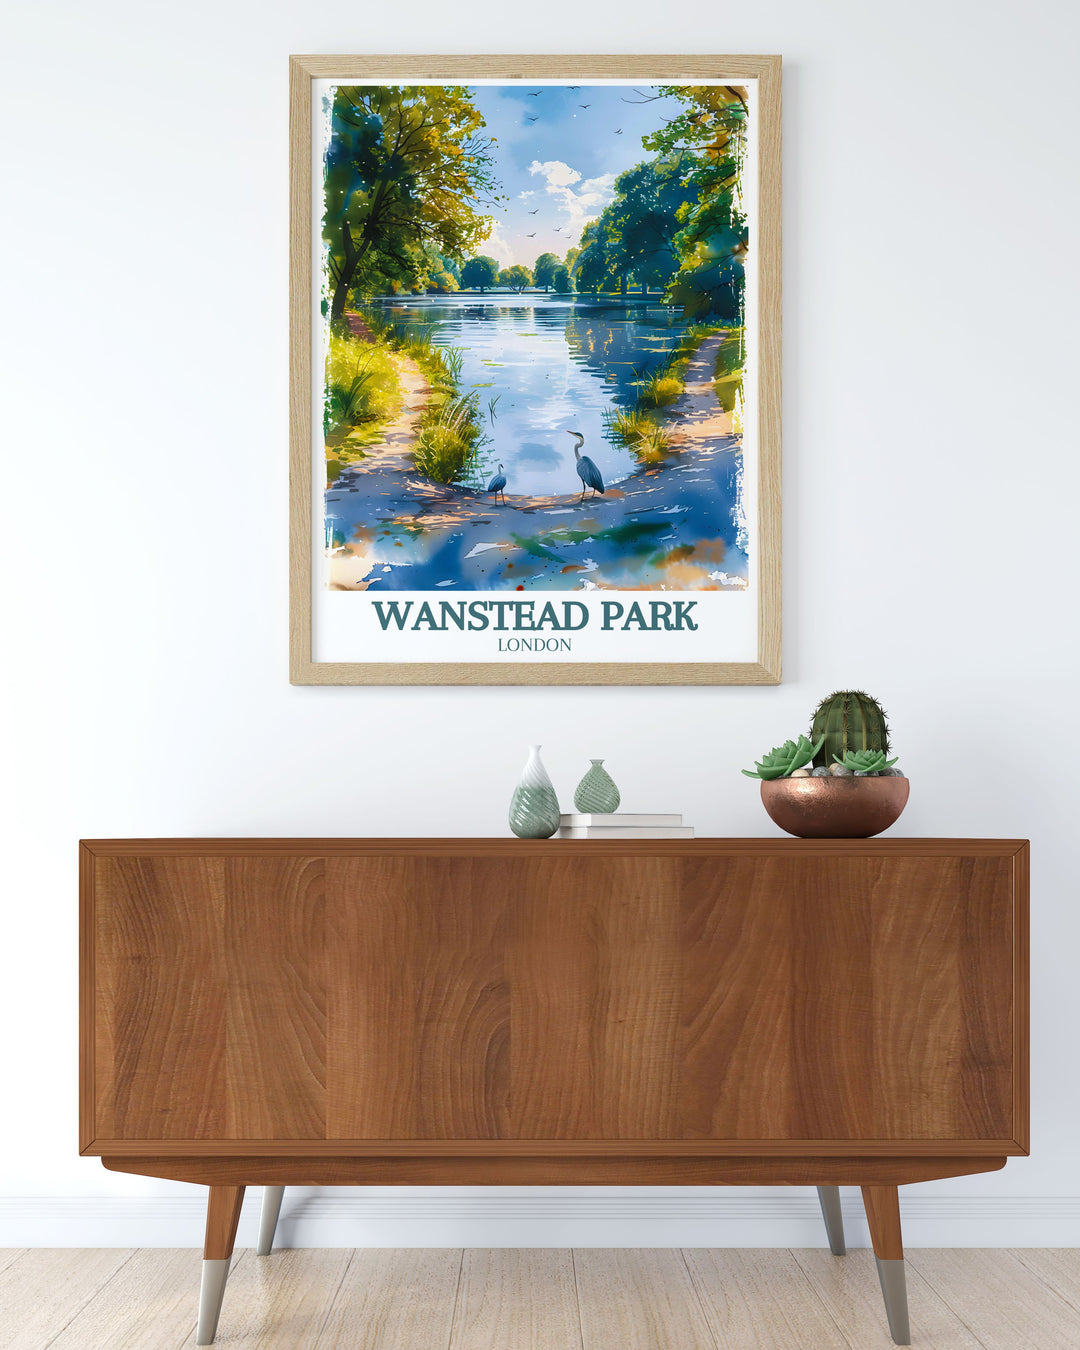 Elegant Wanstead Park wall art showcasing the vibrant colors and serene scenes of this iconic East London location. Ideal for adding a touch of nature inspired beauty to your home or office decor.